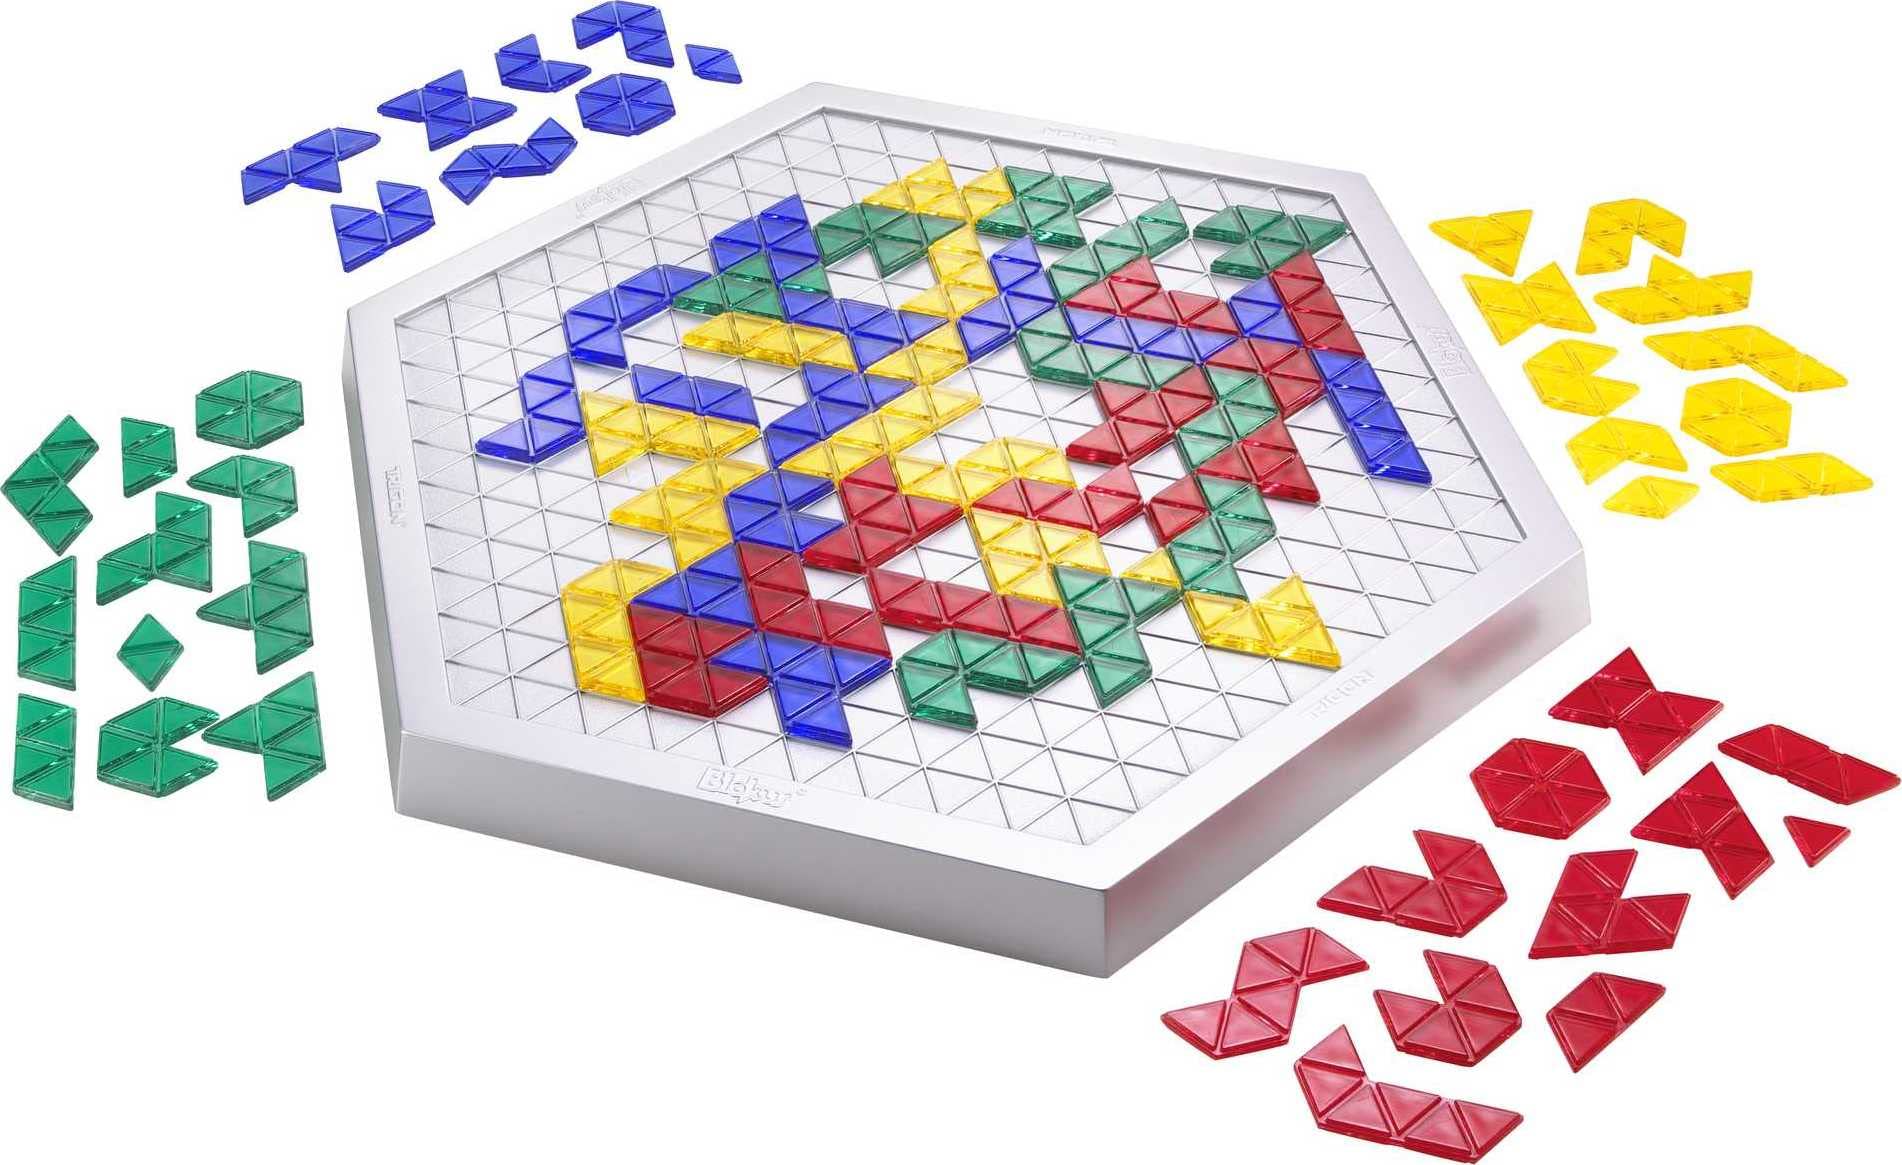 Blokus Trigon Strategy Board Game, Family Game for Kids & Adults with Hexagonal Board & Triangular Pieces (Amazon Exclusive)